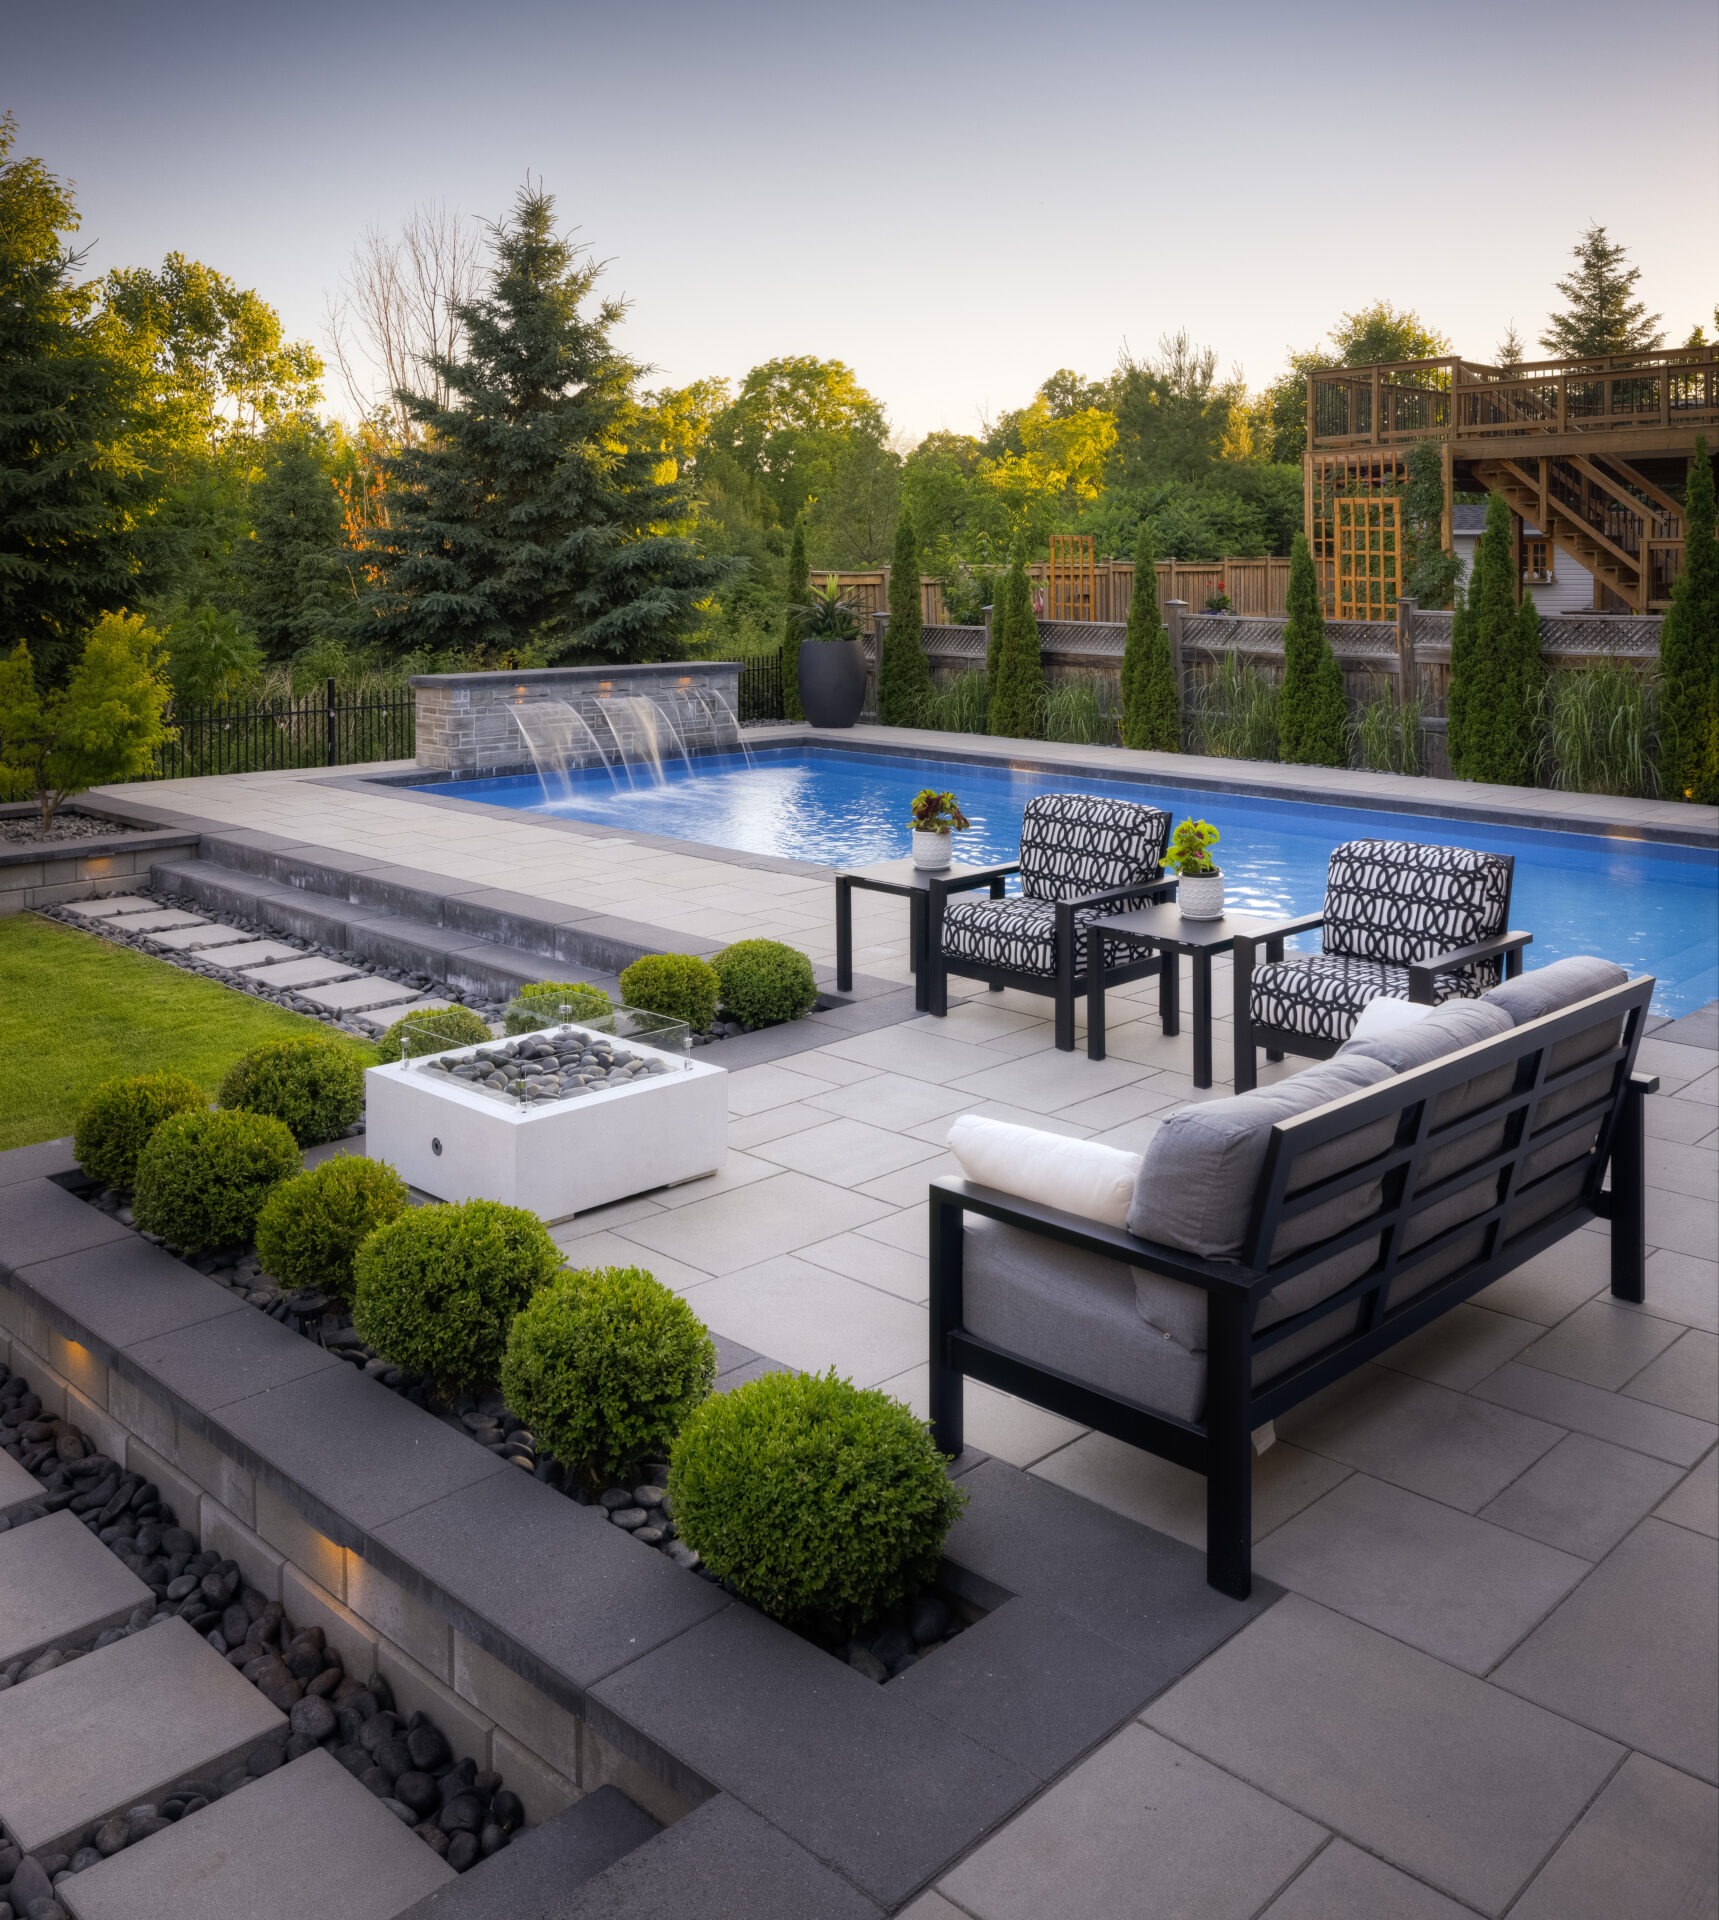 An elegant outdoor area with a swimming pool, water feature, modern patio furniture, landscaped garden, and a wooden deck in a serene setting.